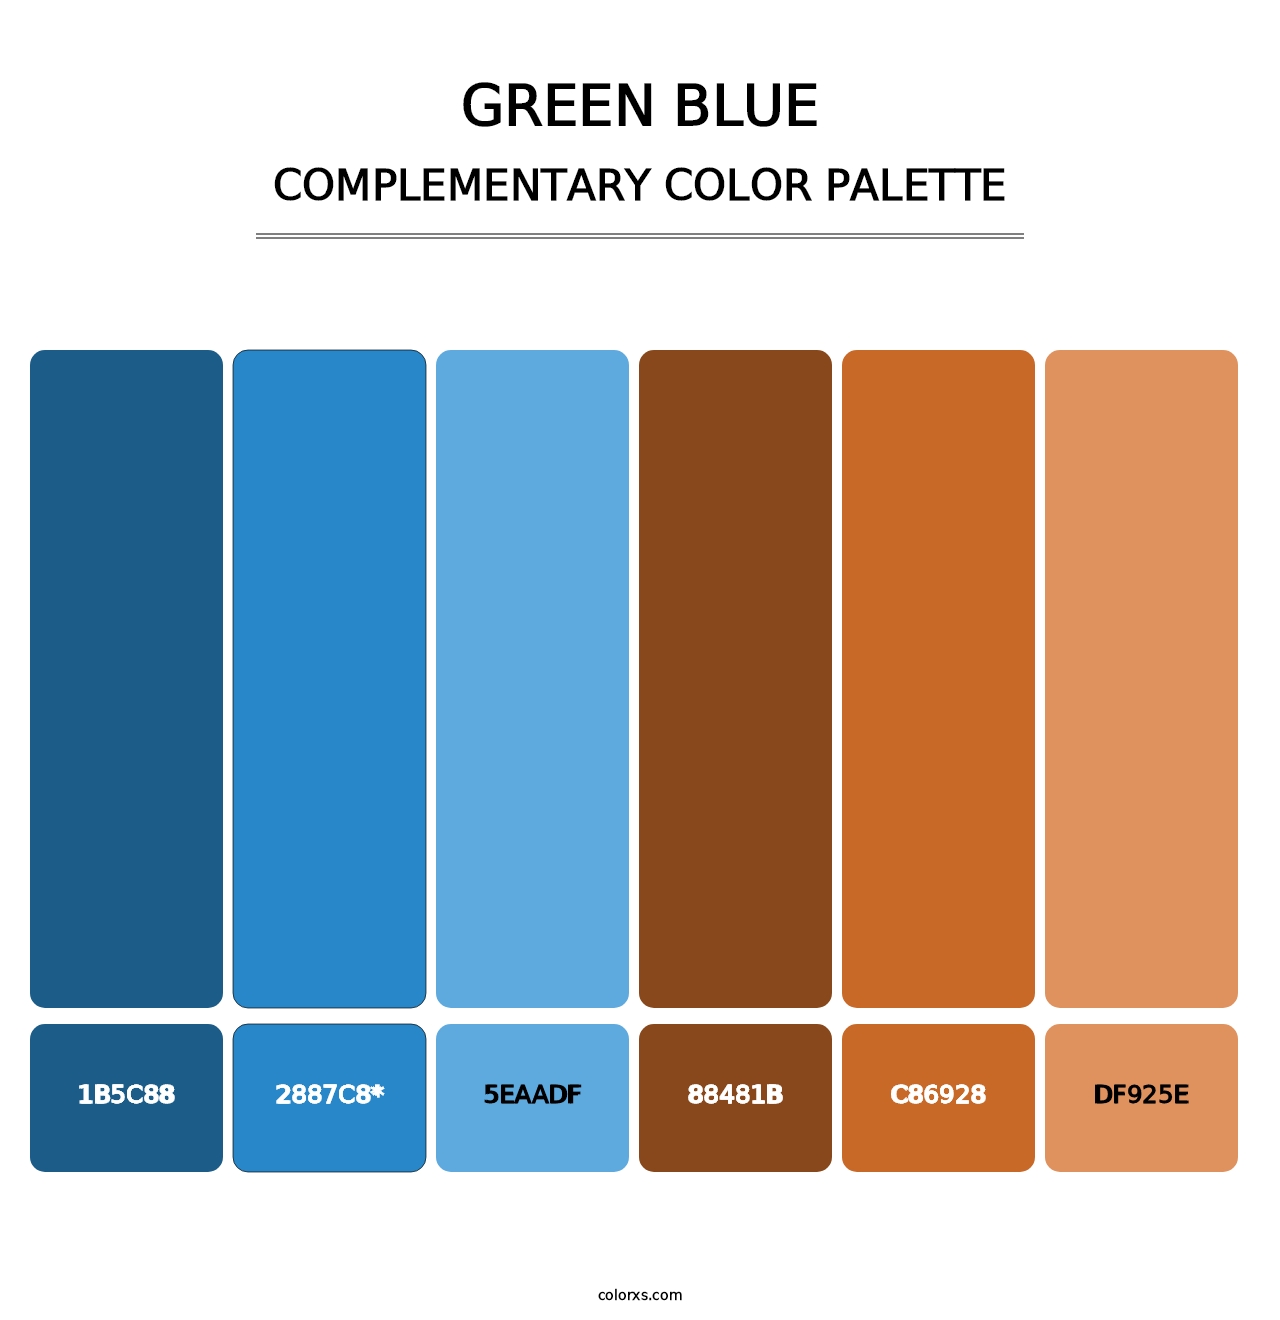 Green Blue - Complementary Color Palette